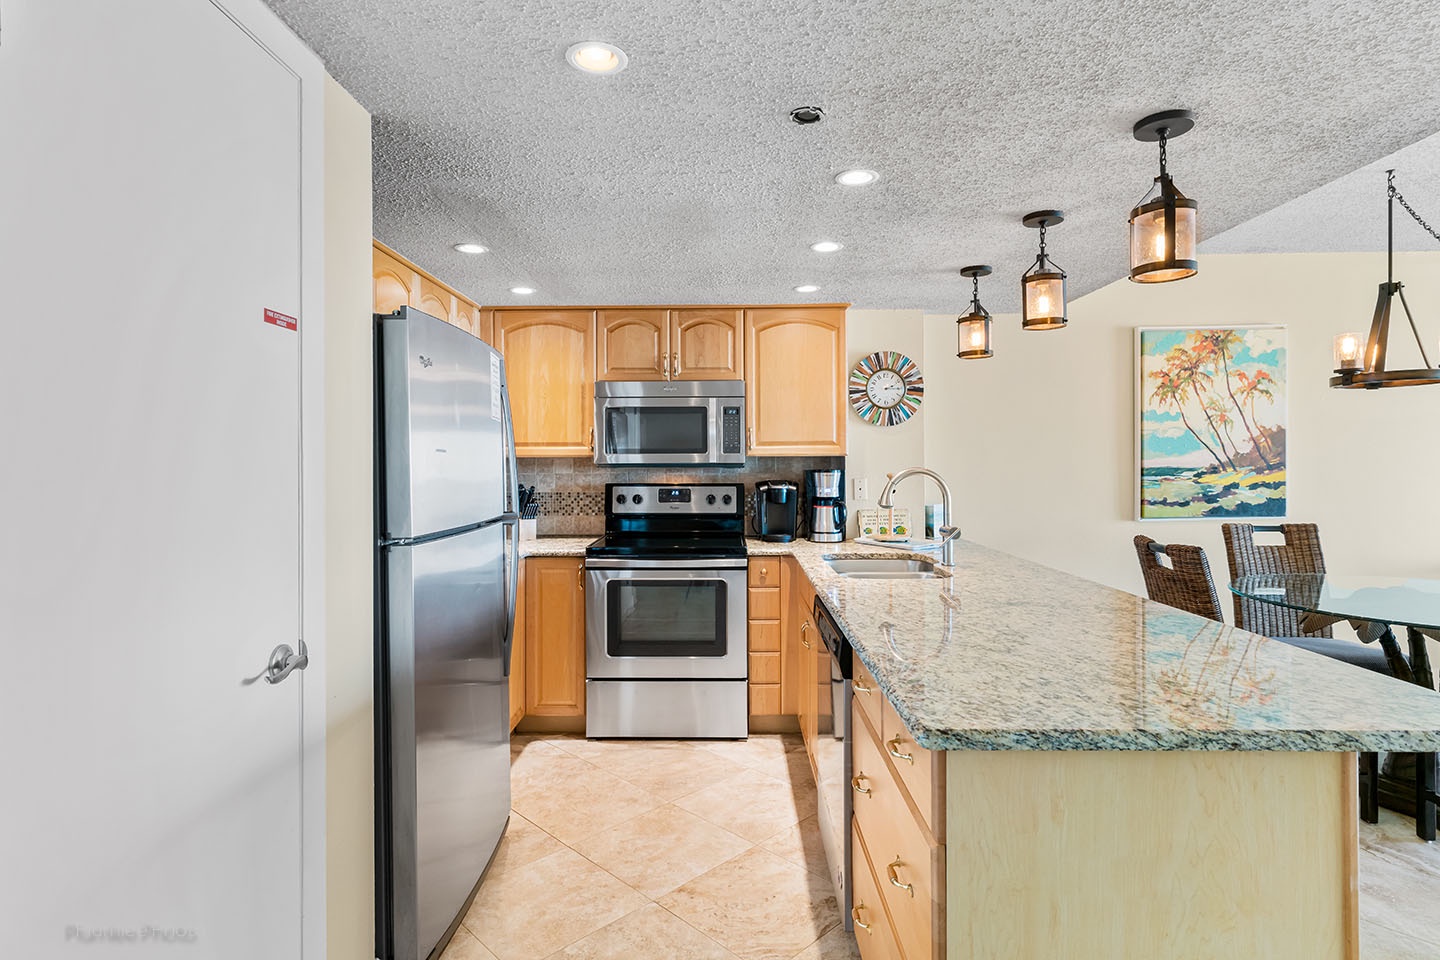 Prepare your own meals and snacks in a fully equipped kitchen.